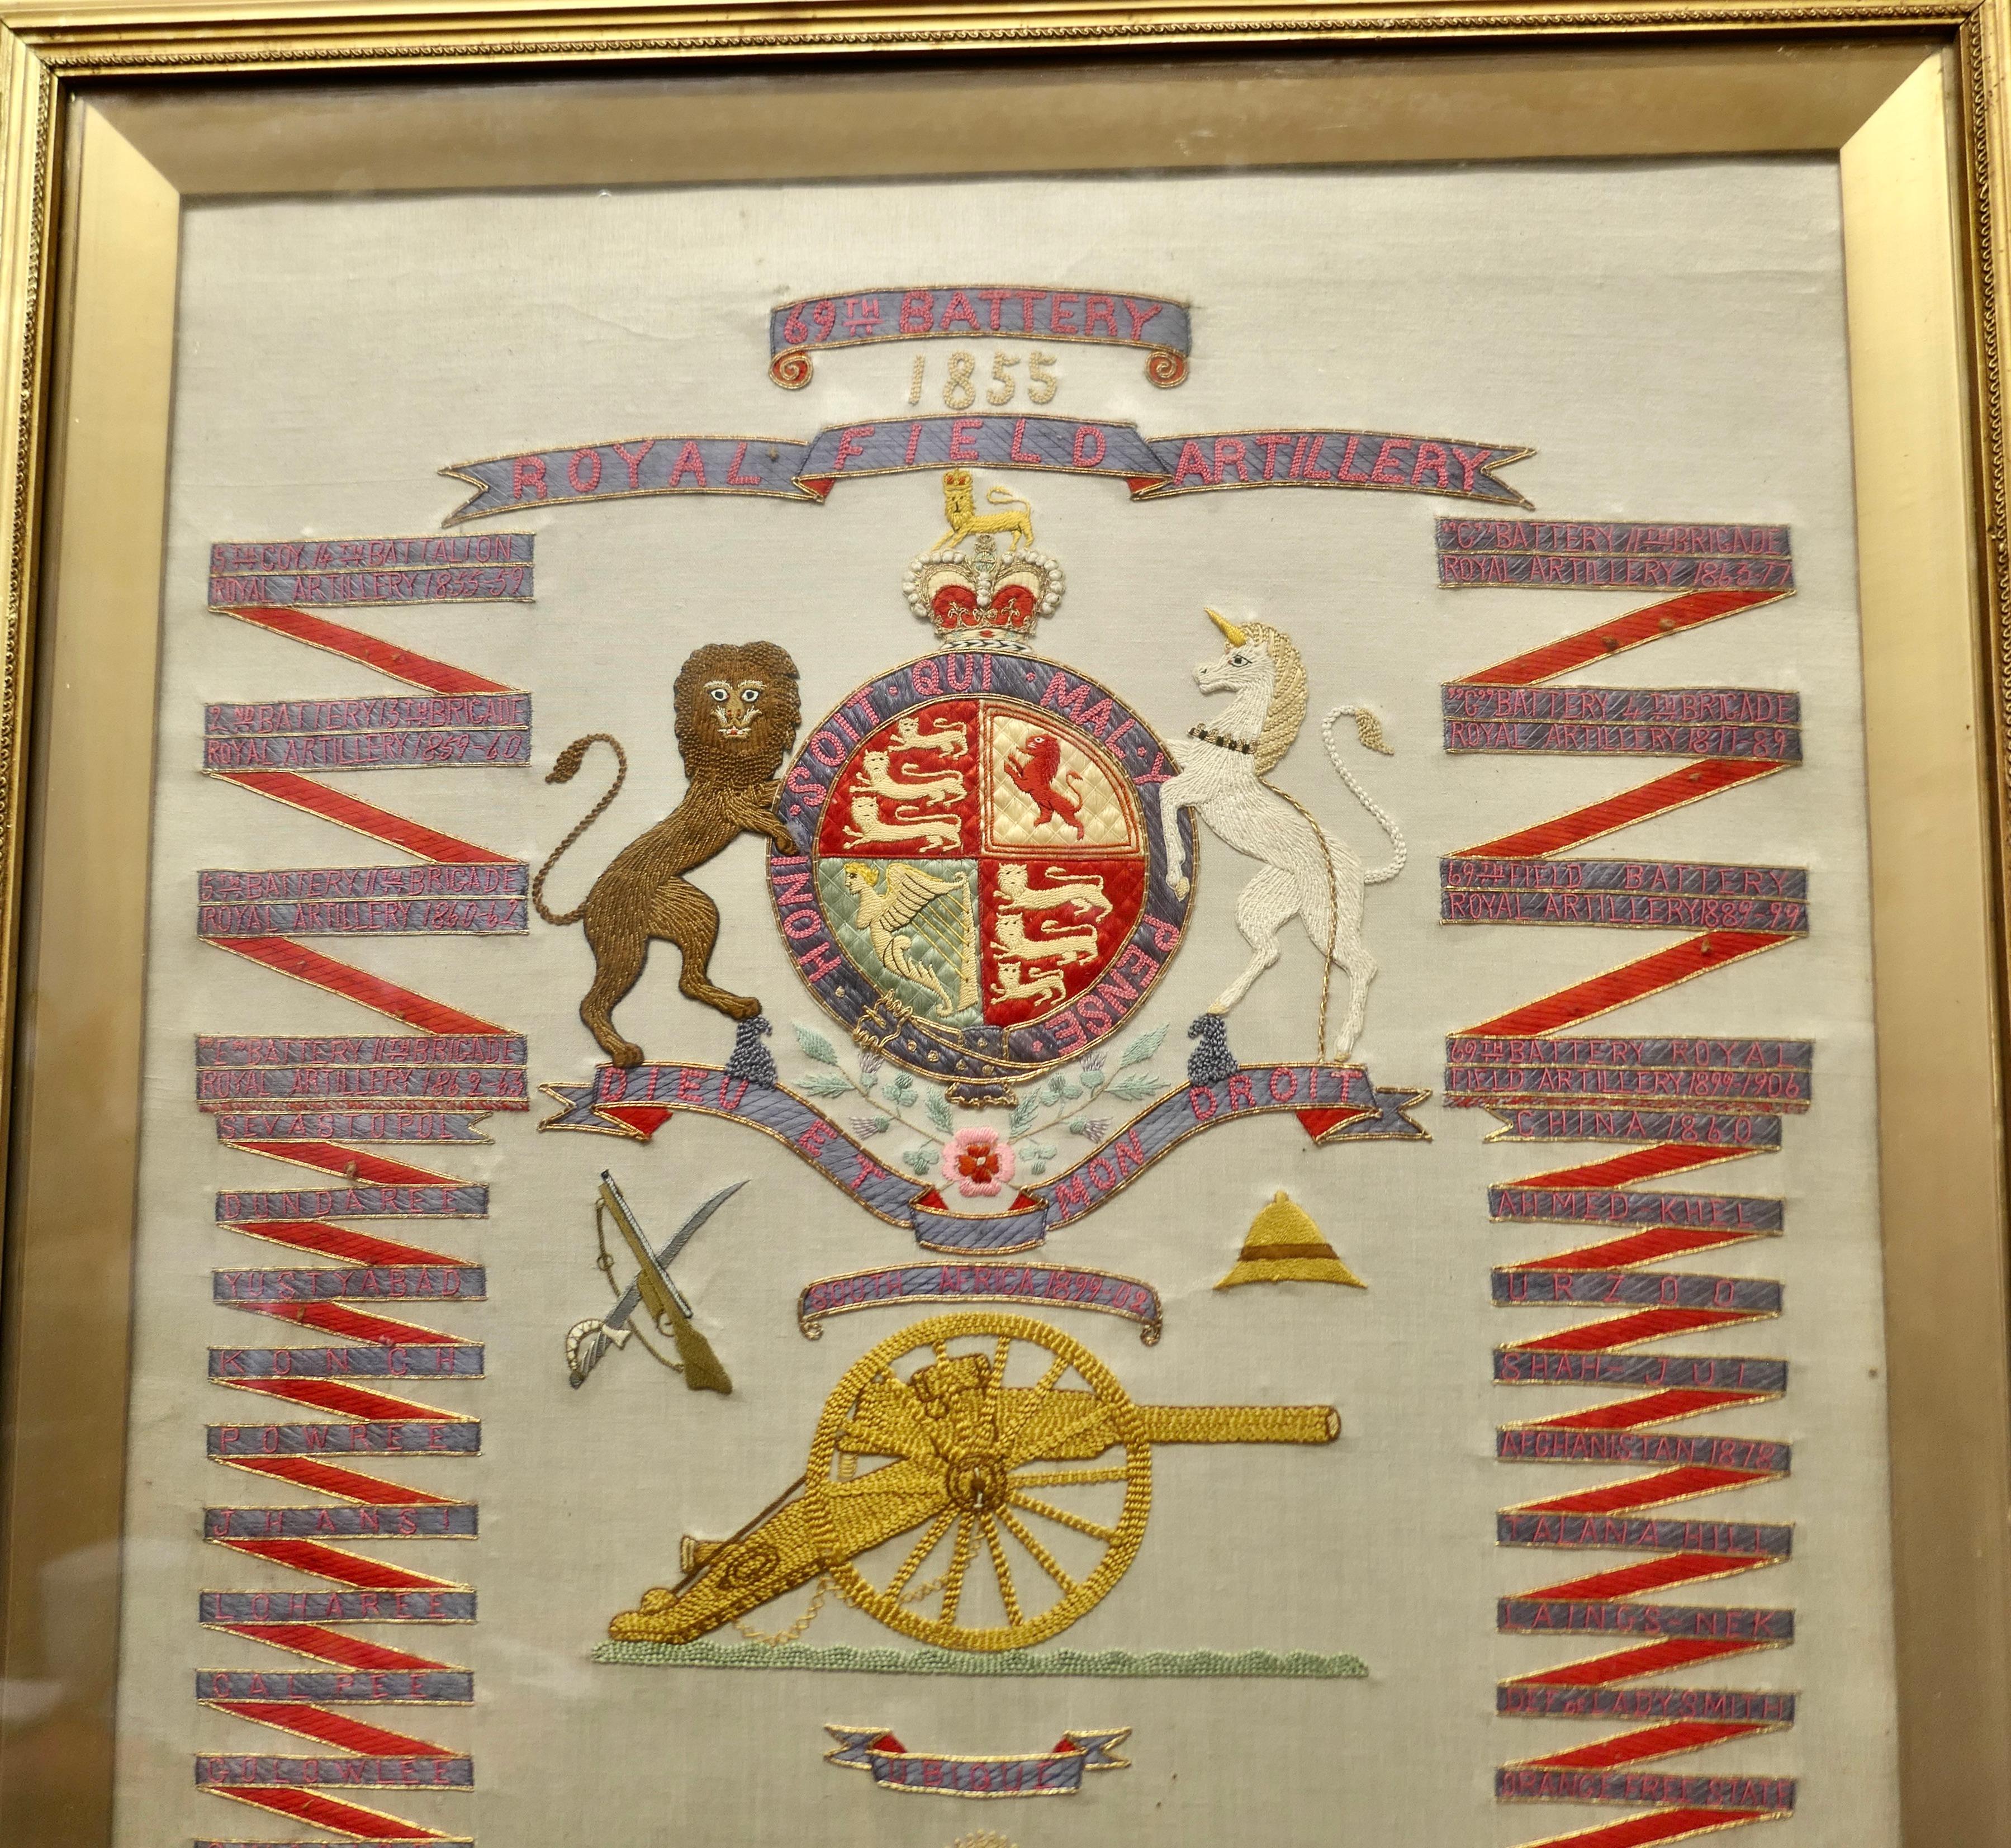  69th Battery Royal Field Artillery Framed Commemorative Embroidery     For Sale 1